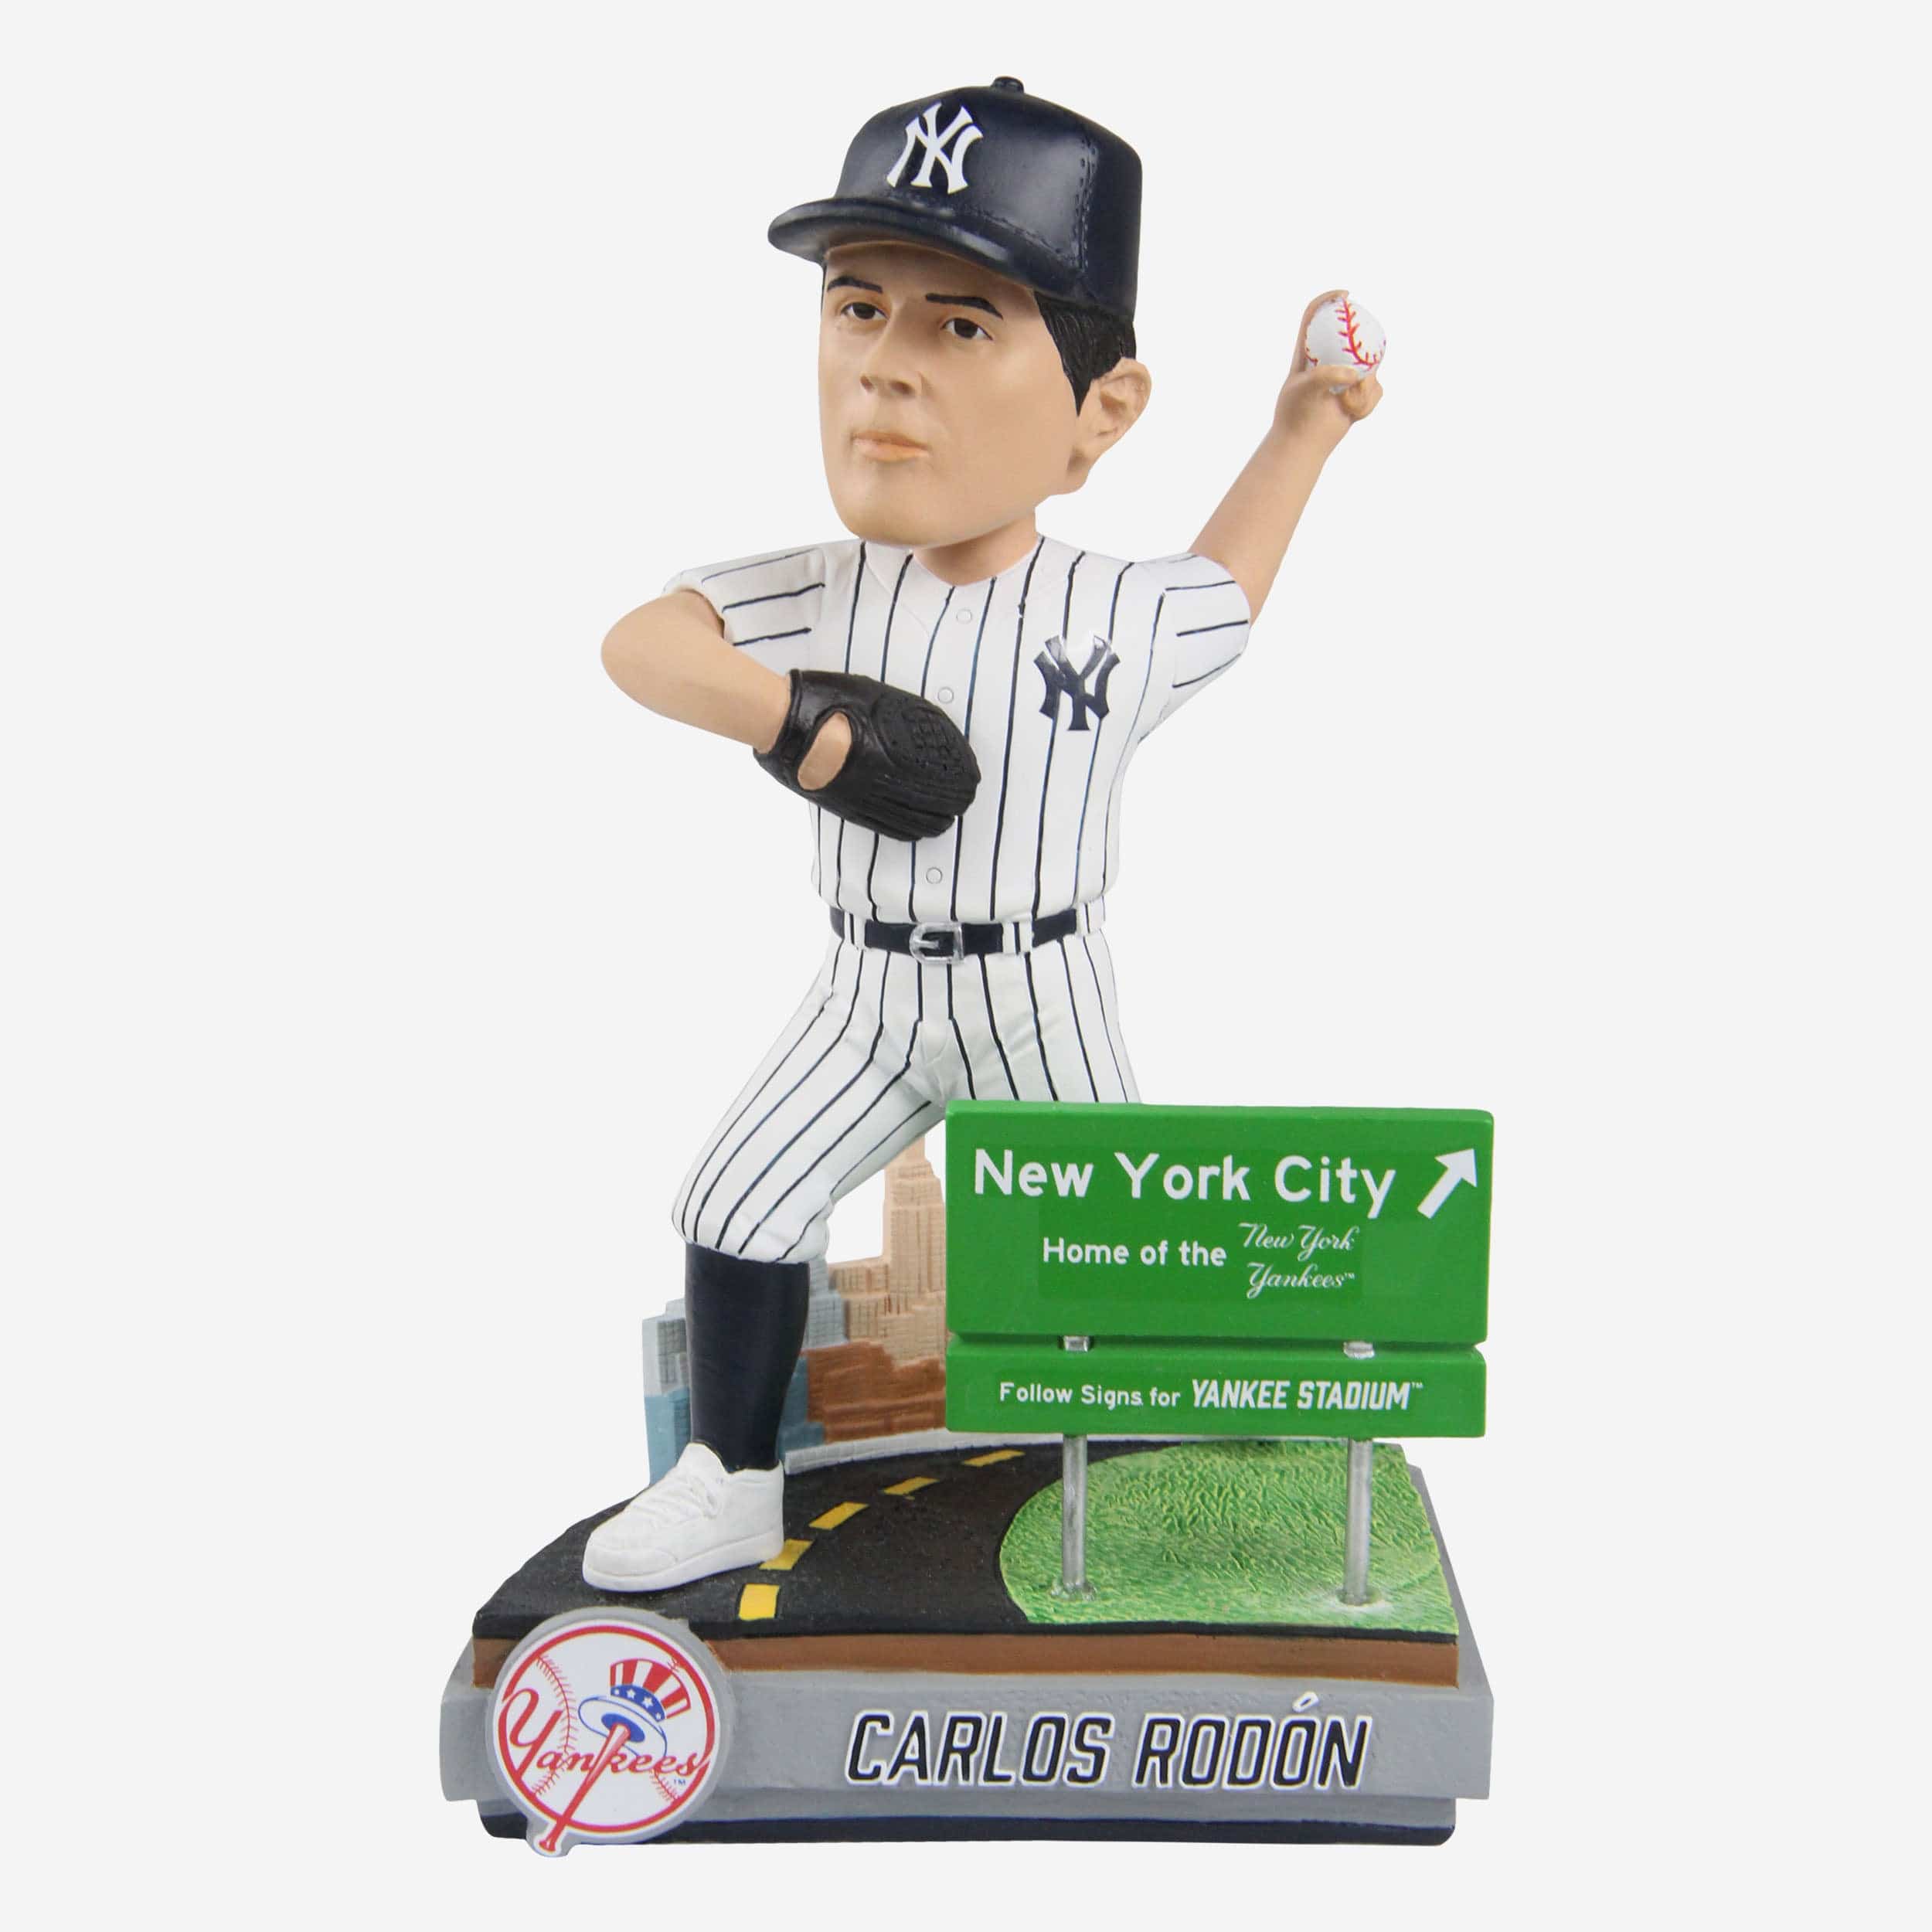 Carlos Rodon New York Yankees Next Stop Bobblehead Officially Licensed by MLB